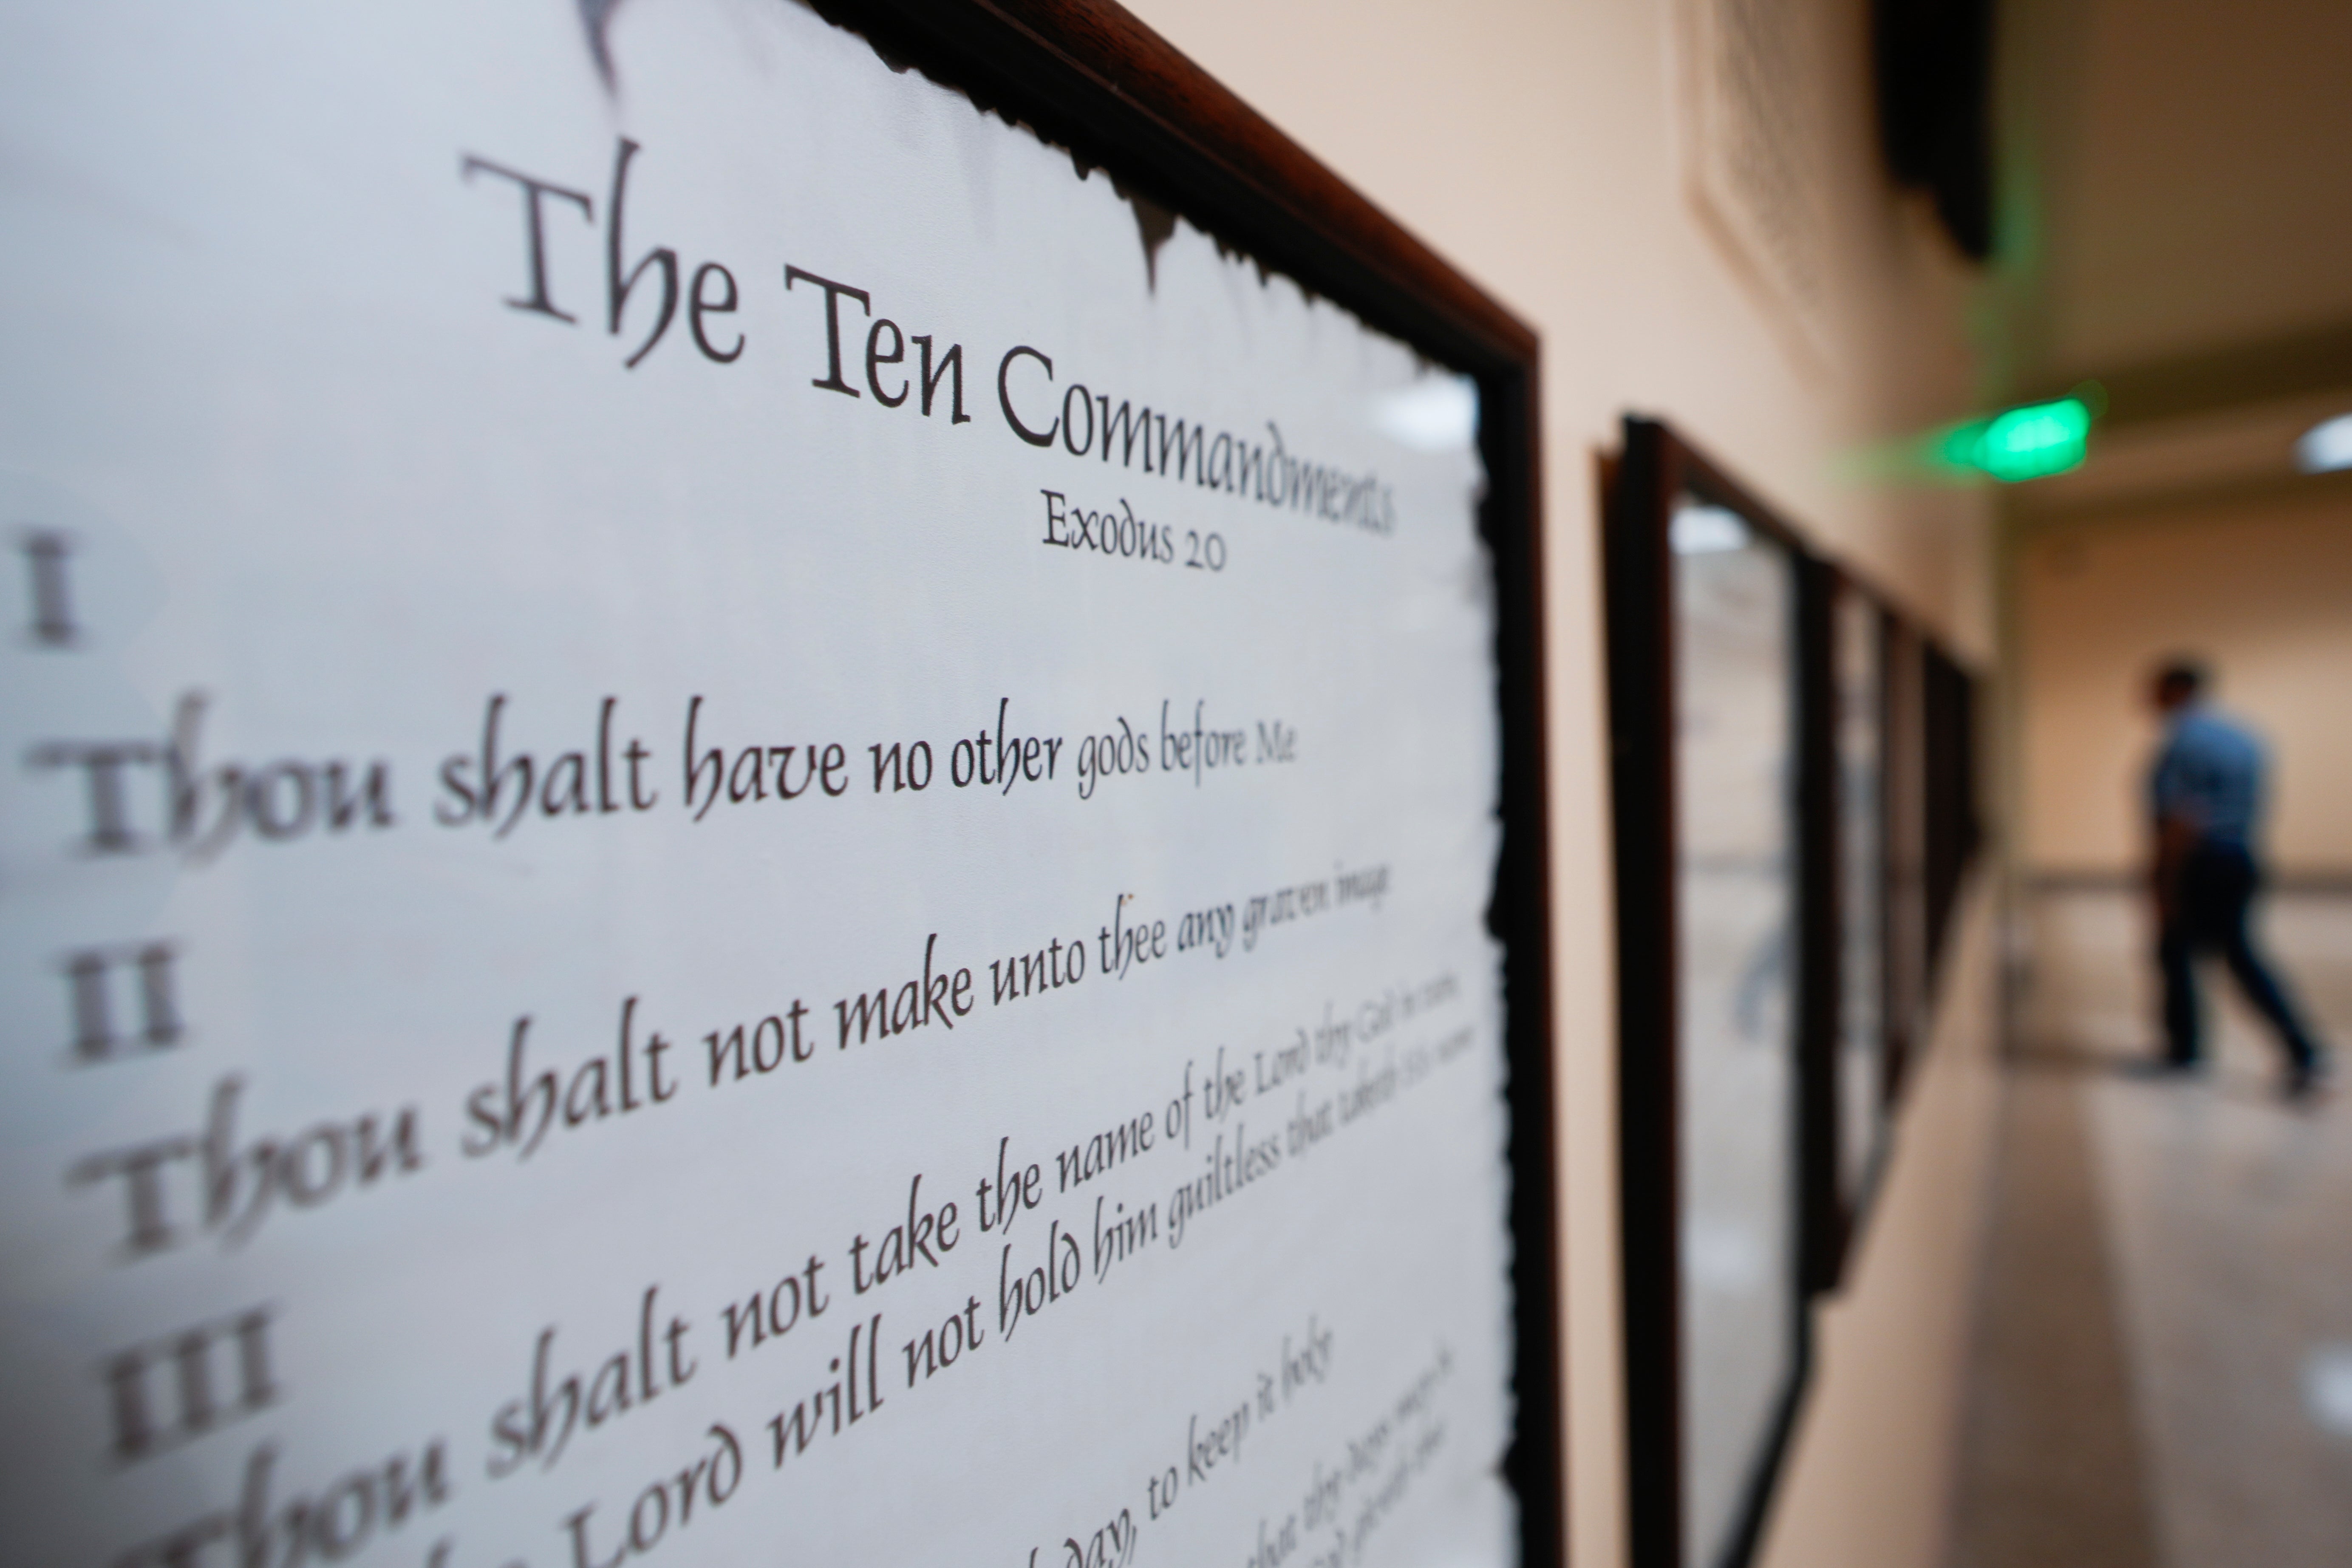 FILEA copy of the Ten Commandments is posted along with other historical documents in a hallway of the Georgia Capitol on June 20. Civil liberties groups filed a lawsuit on June 24 challenging Louisiana’s mandate that public school classrooms display the Ten Commandments.